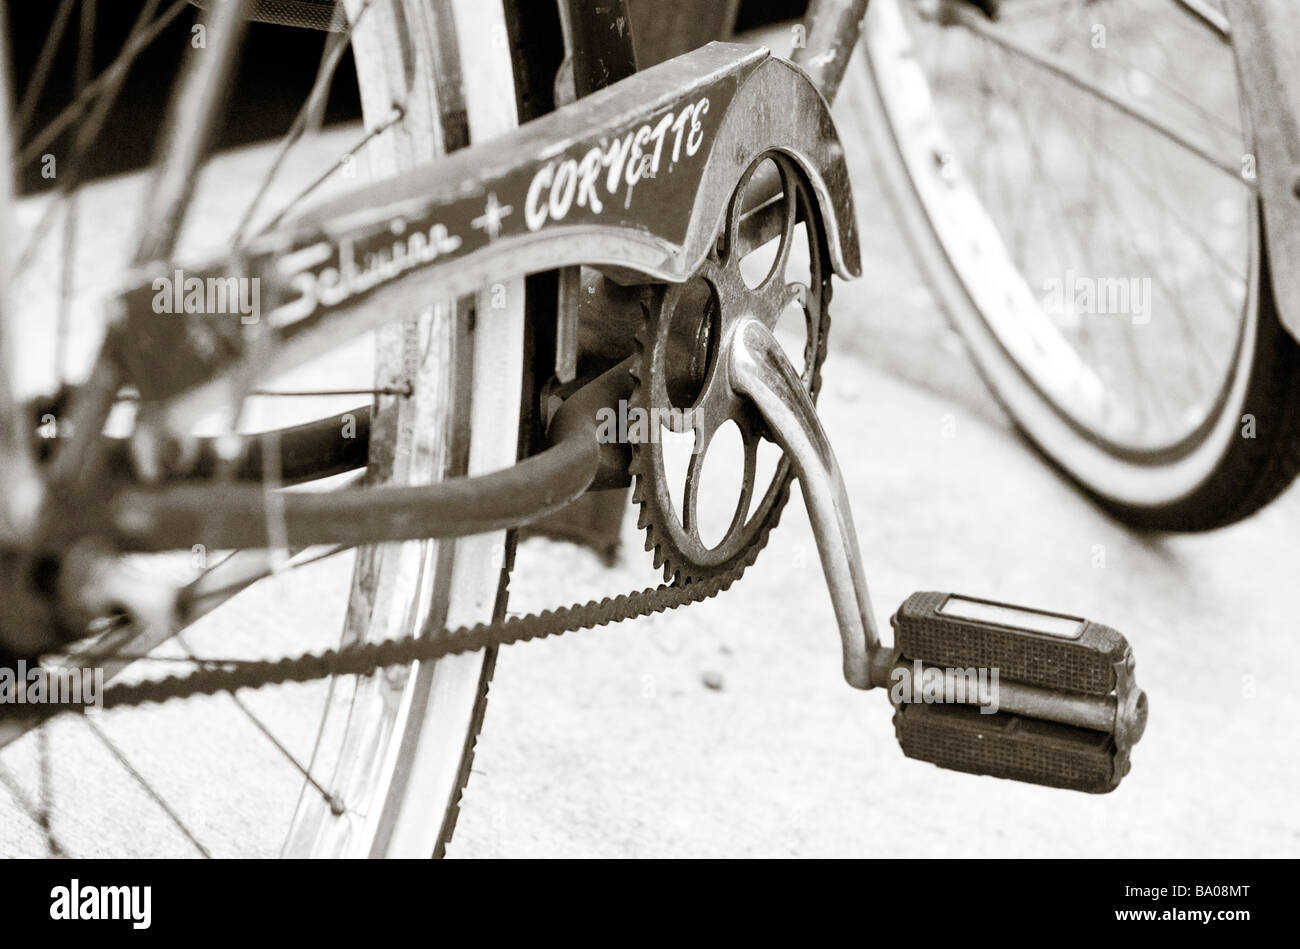 Closeup of Schwinn Corvette Bicycle Pedal and Gears (For Editorial Use Only) Stock Photo